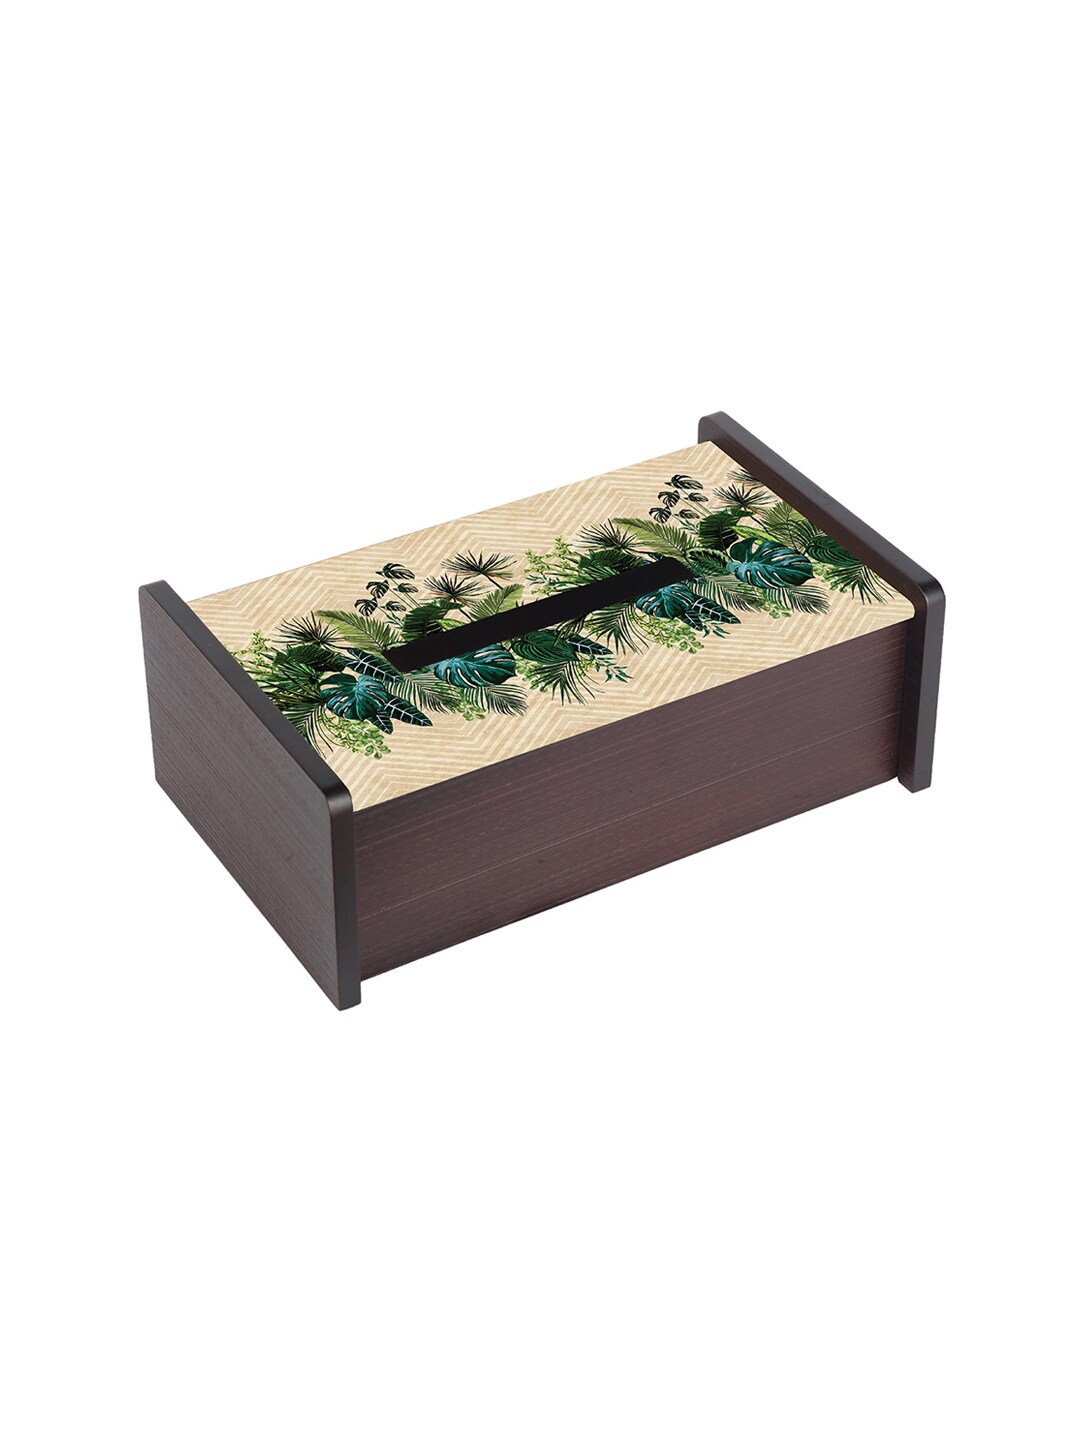 TimberTech Brown & Beige Printed Amazon Wood Tissue Holder Price in India